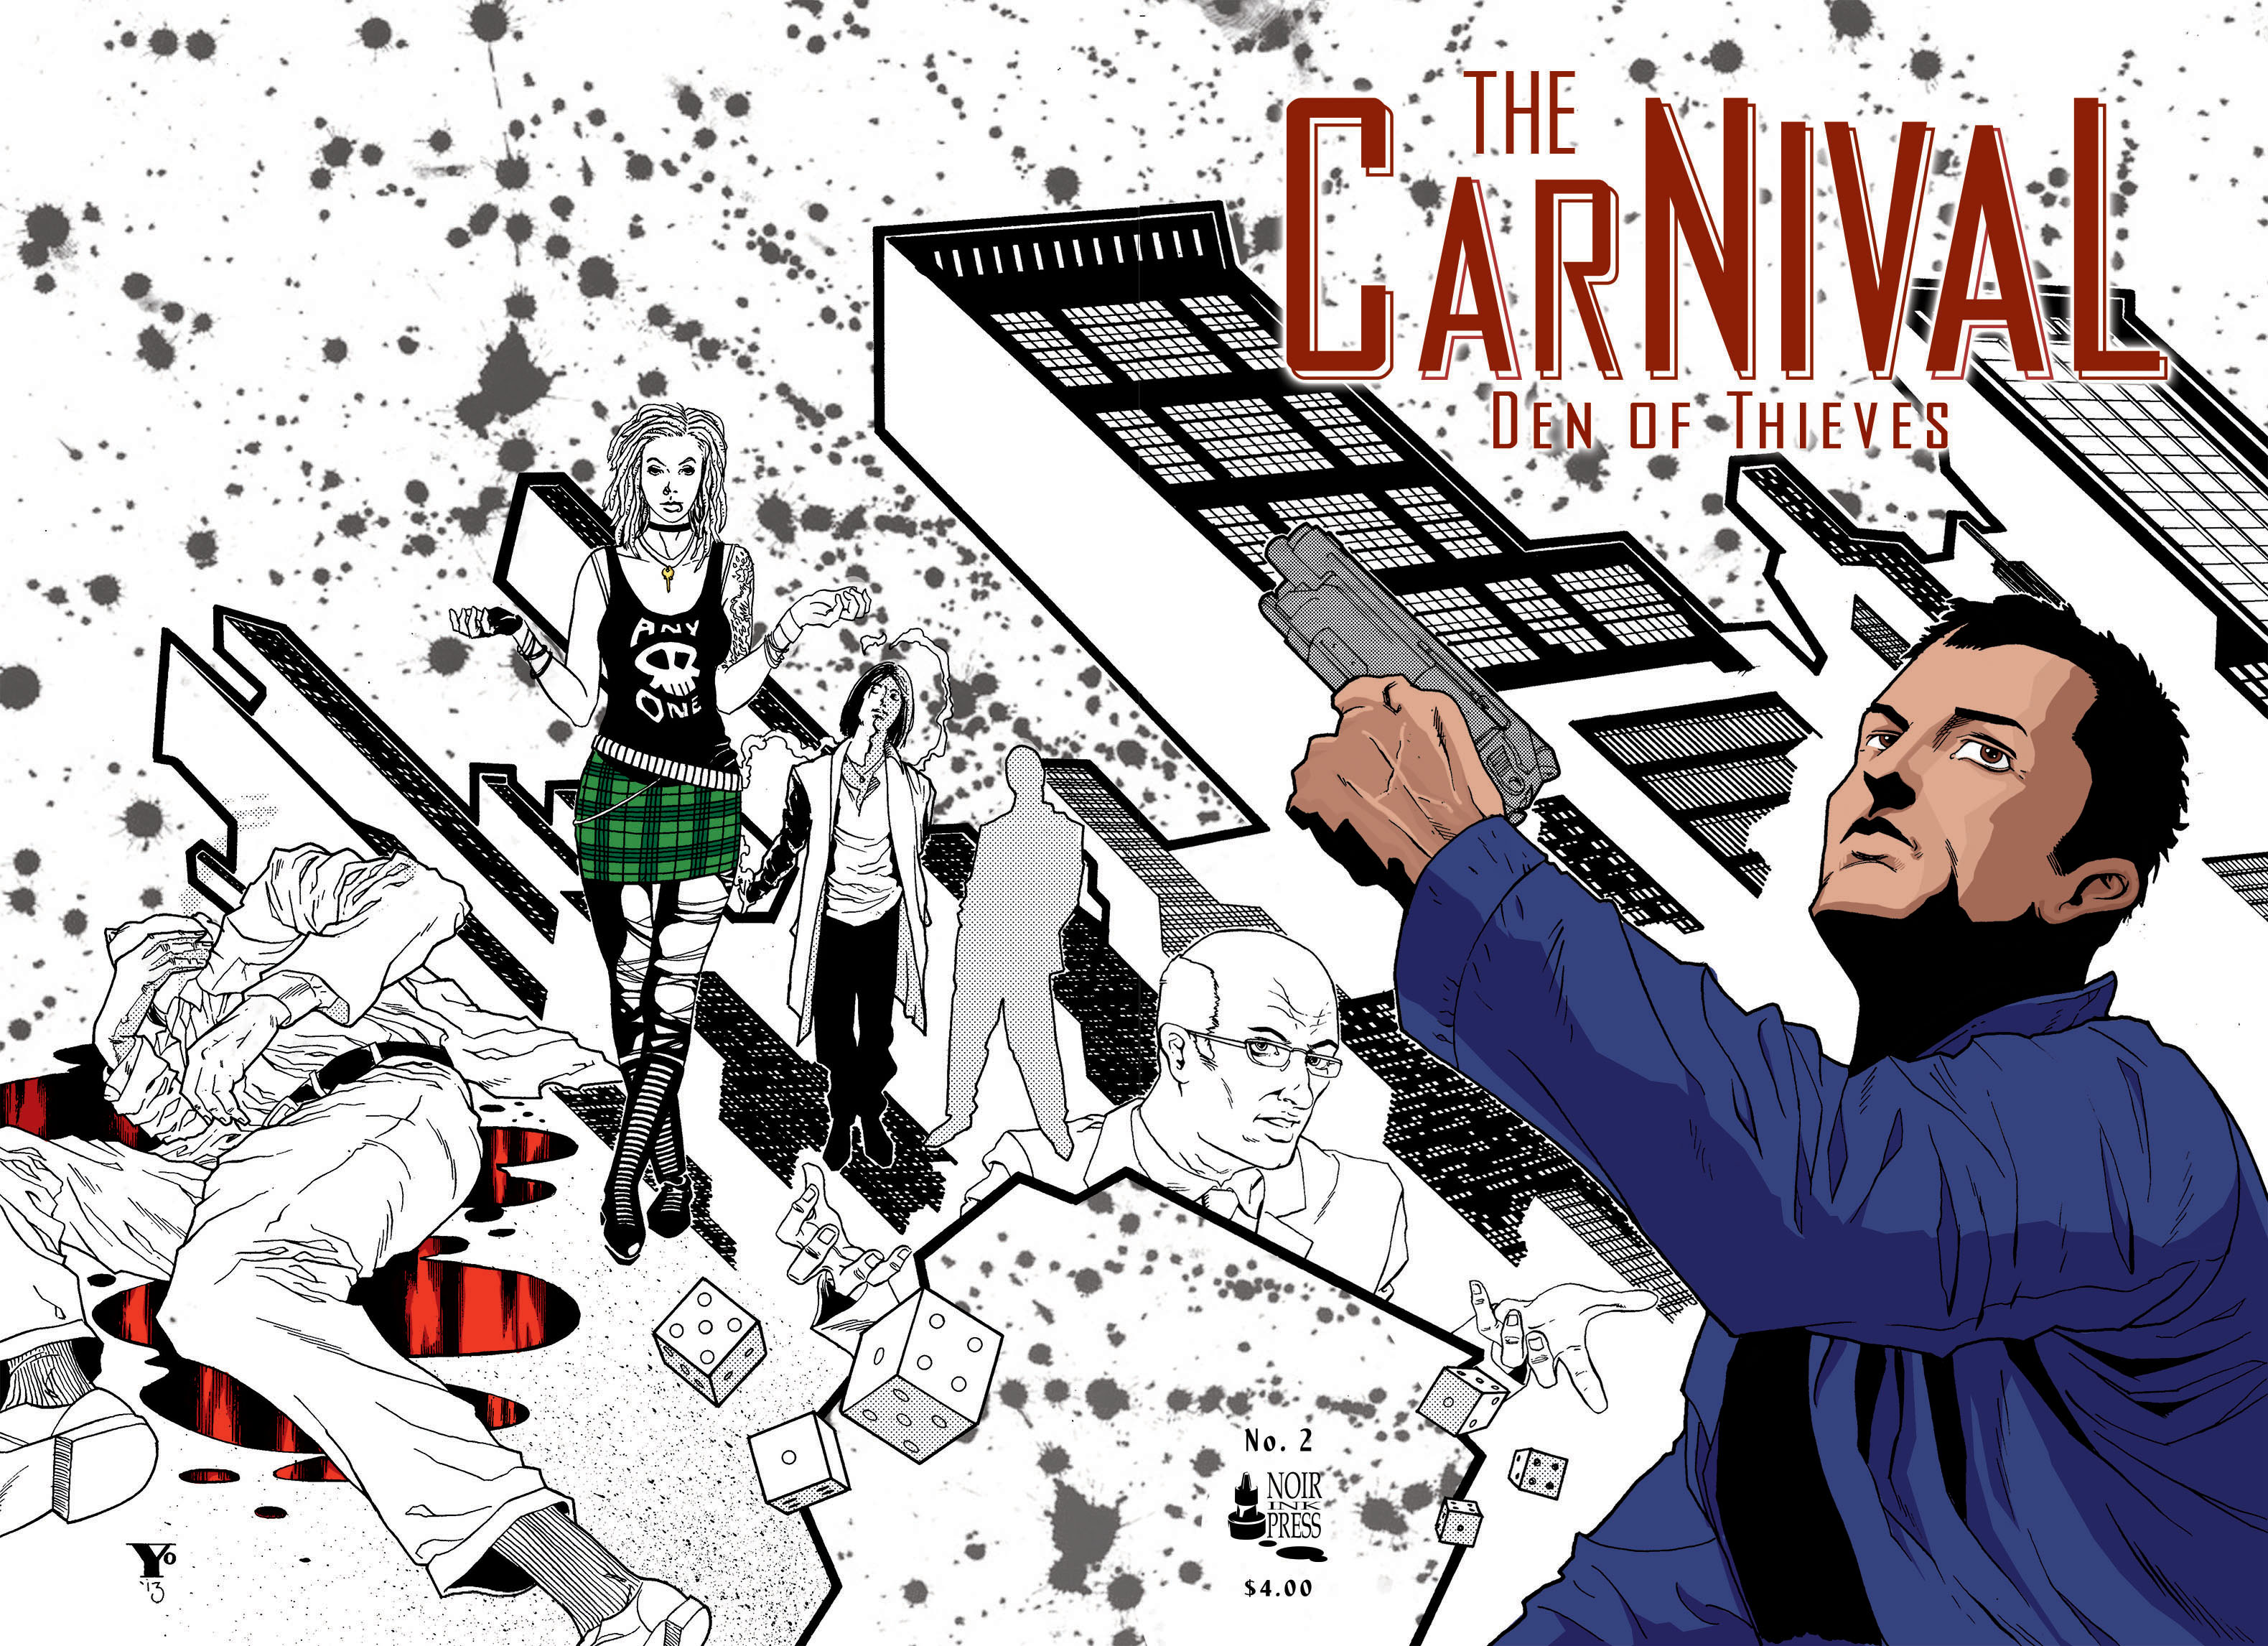 The Carnival: Den of Thieves Graphic Novel